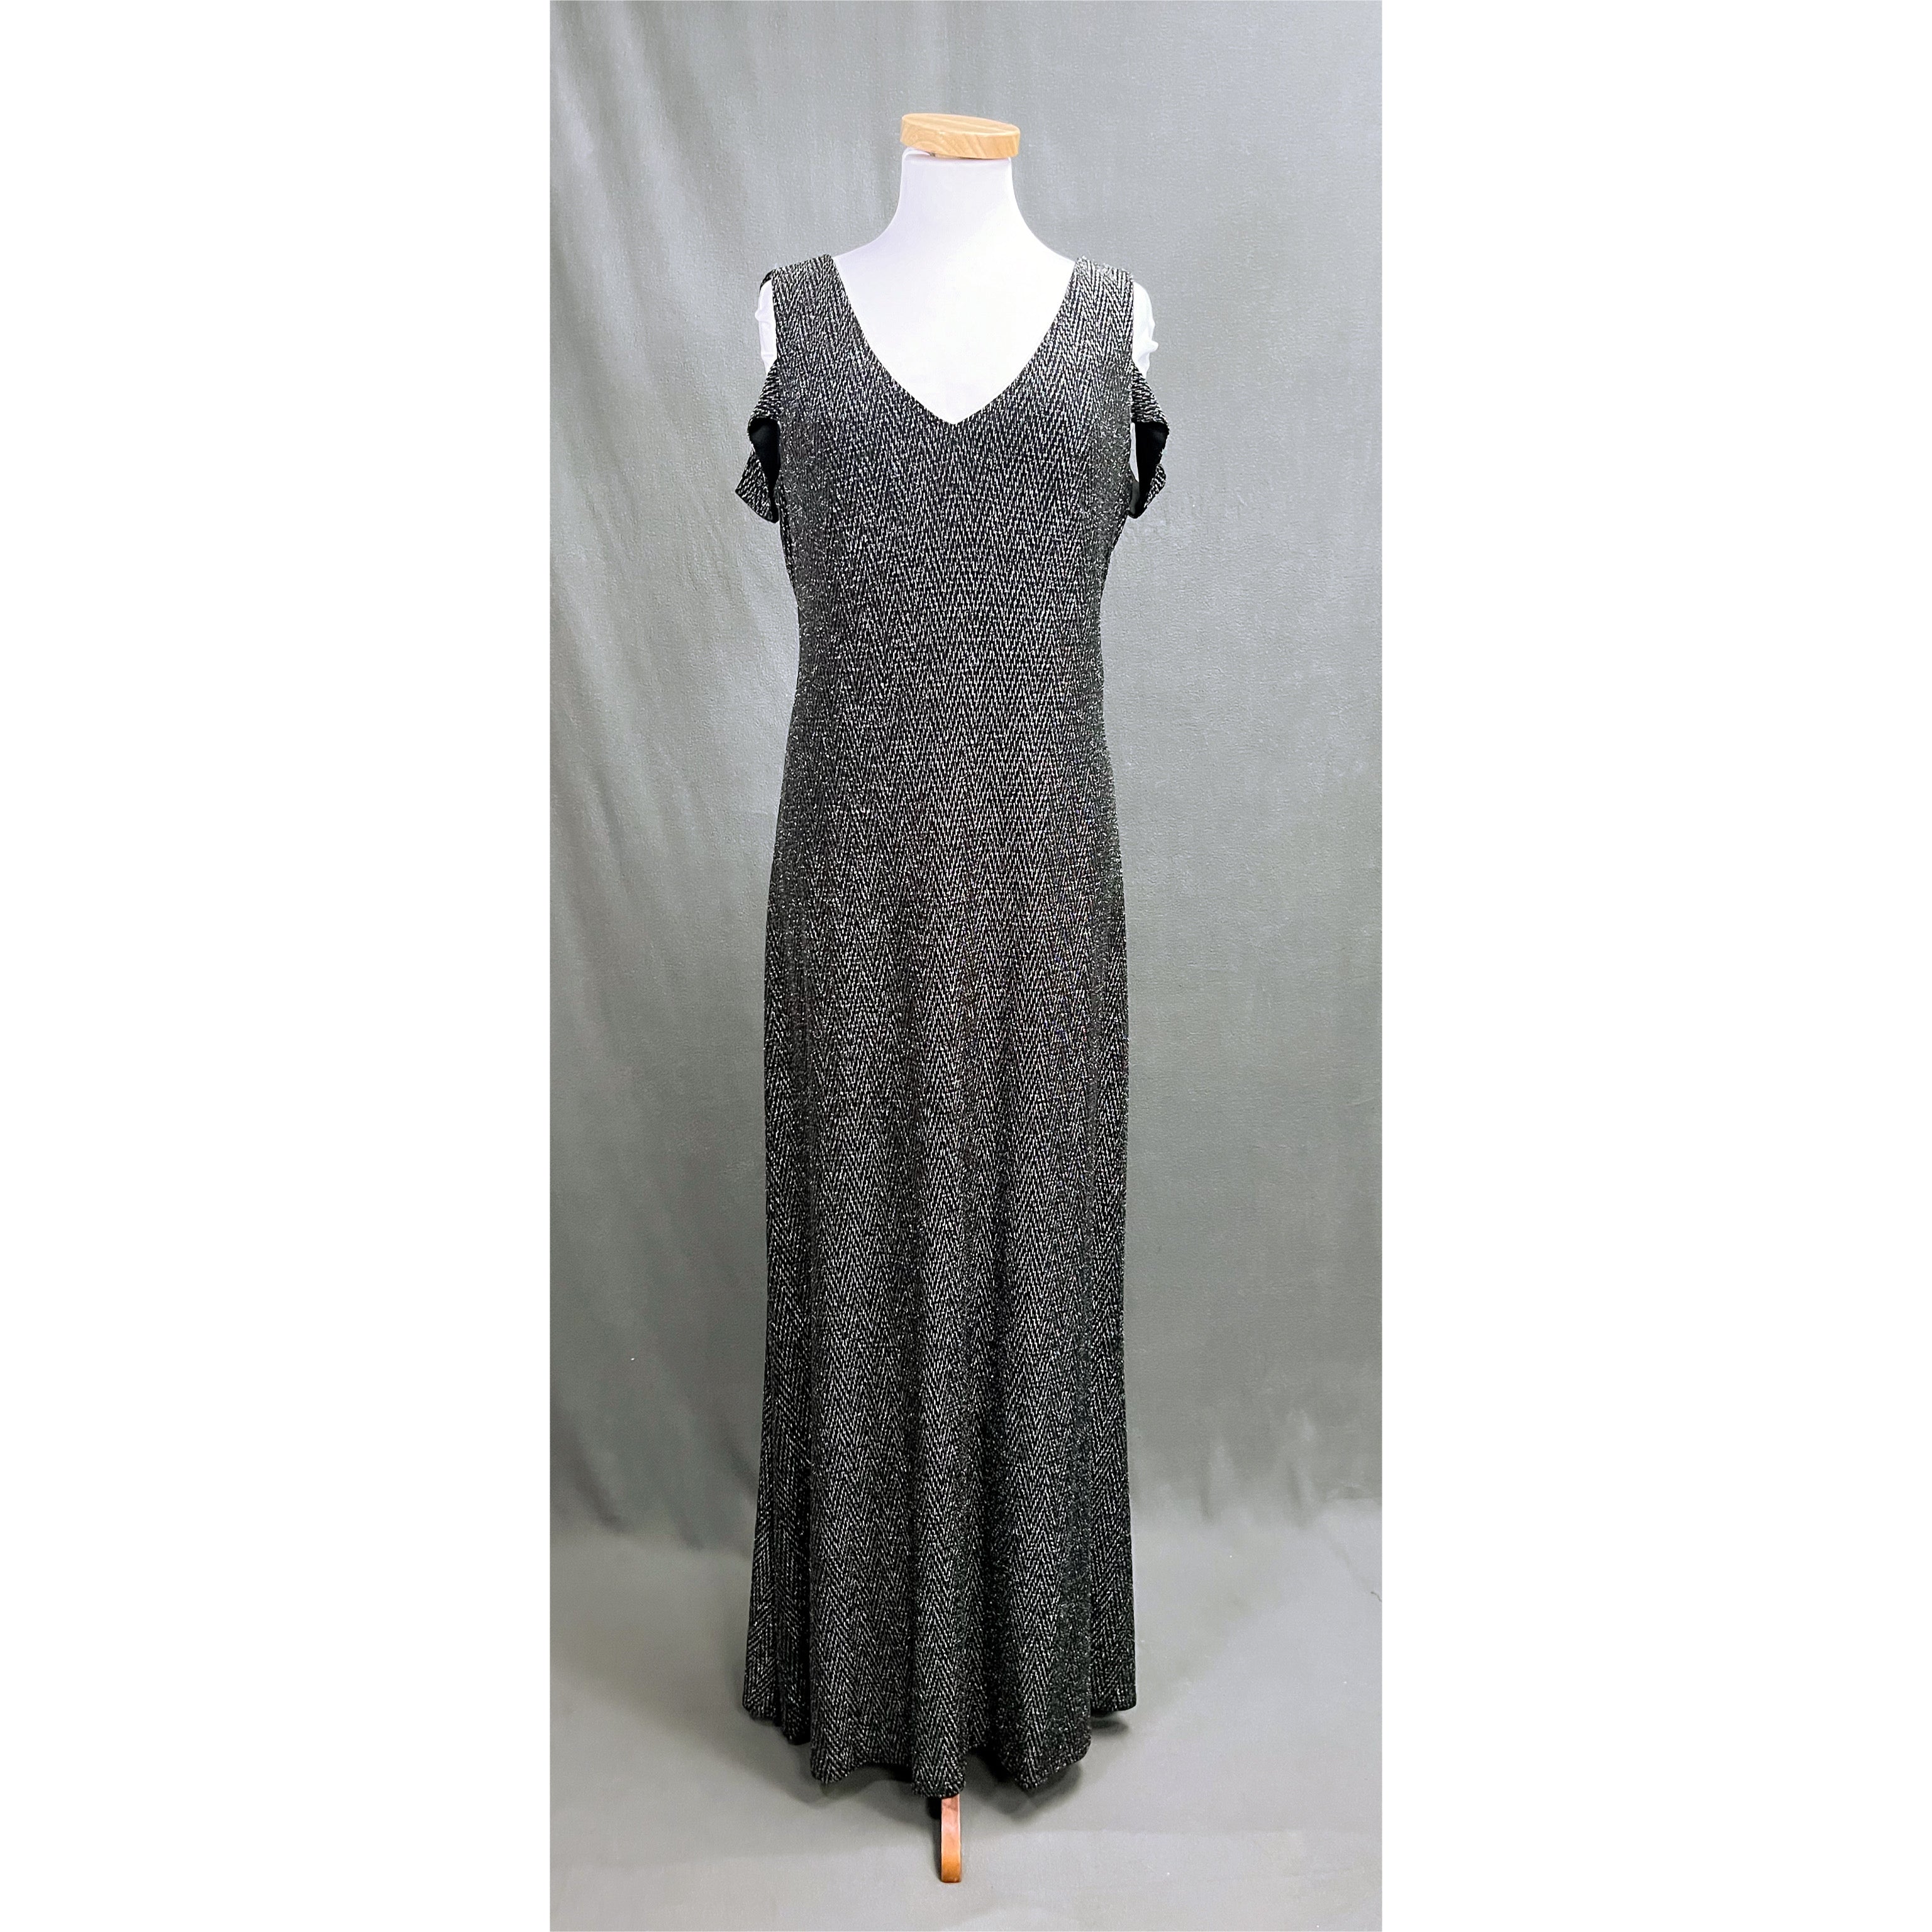 Cartise black & silver dress, size 10, NEW WITH TAGS!